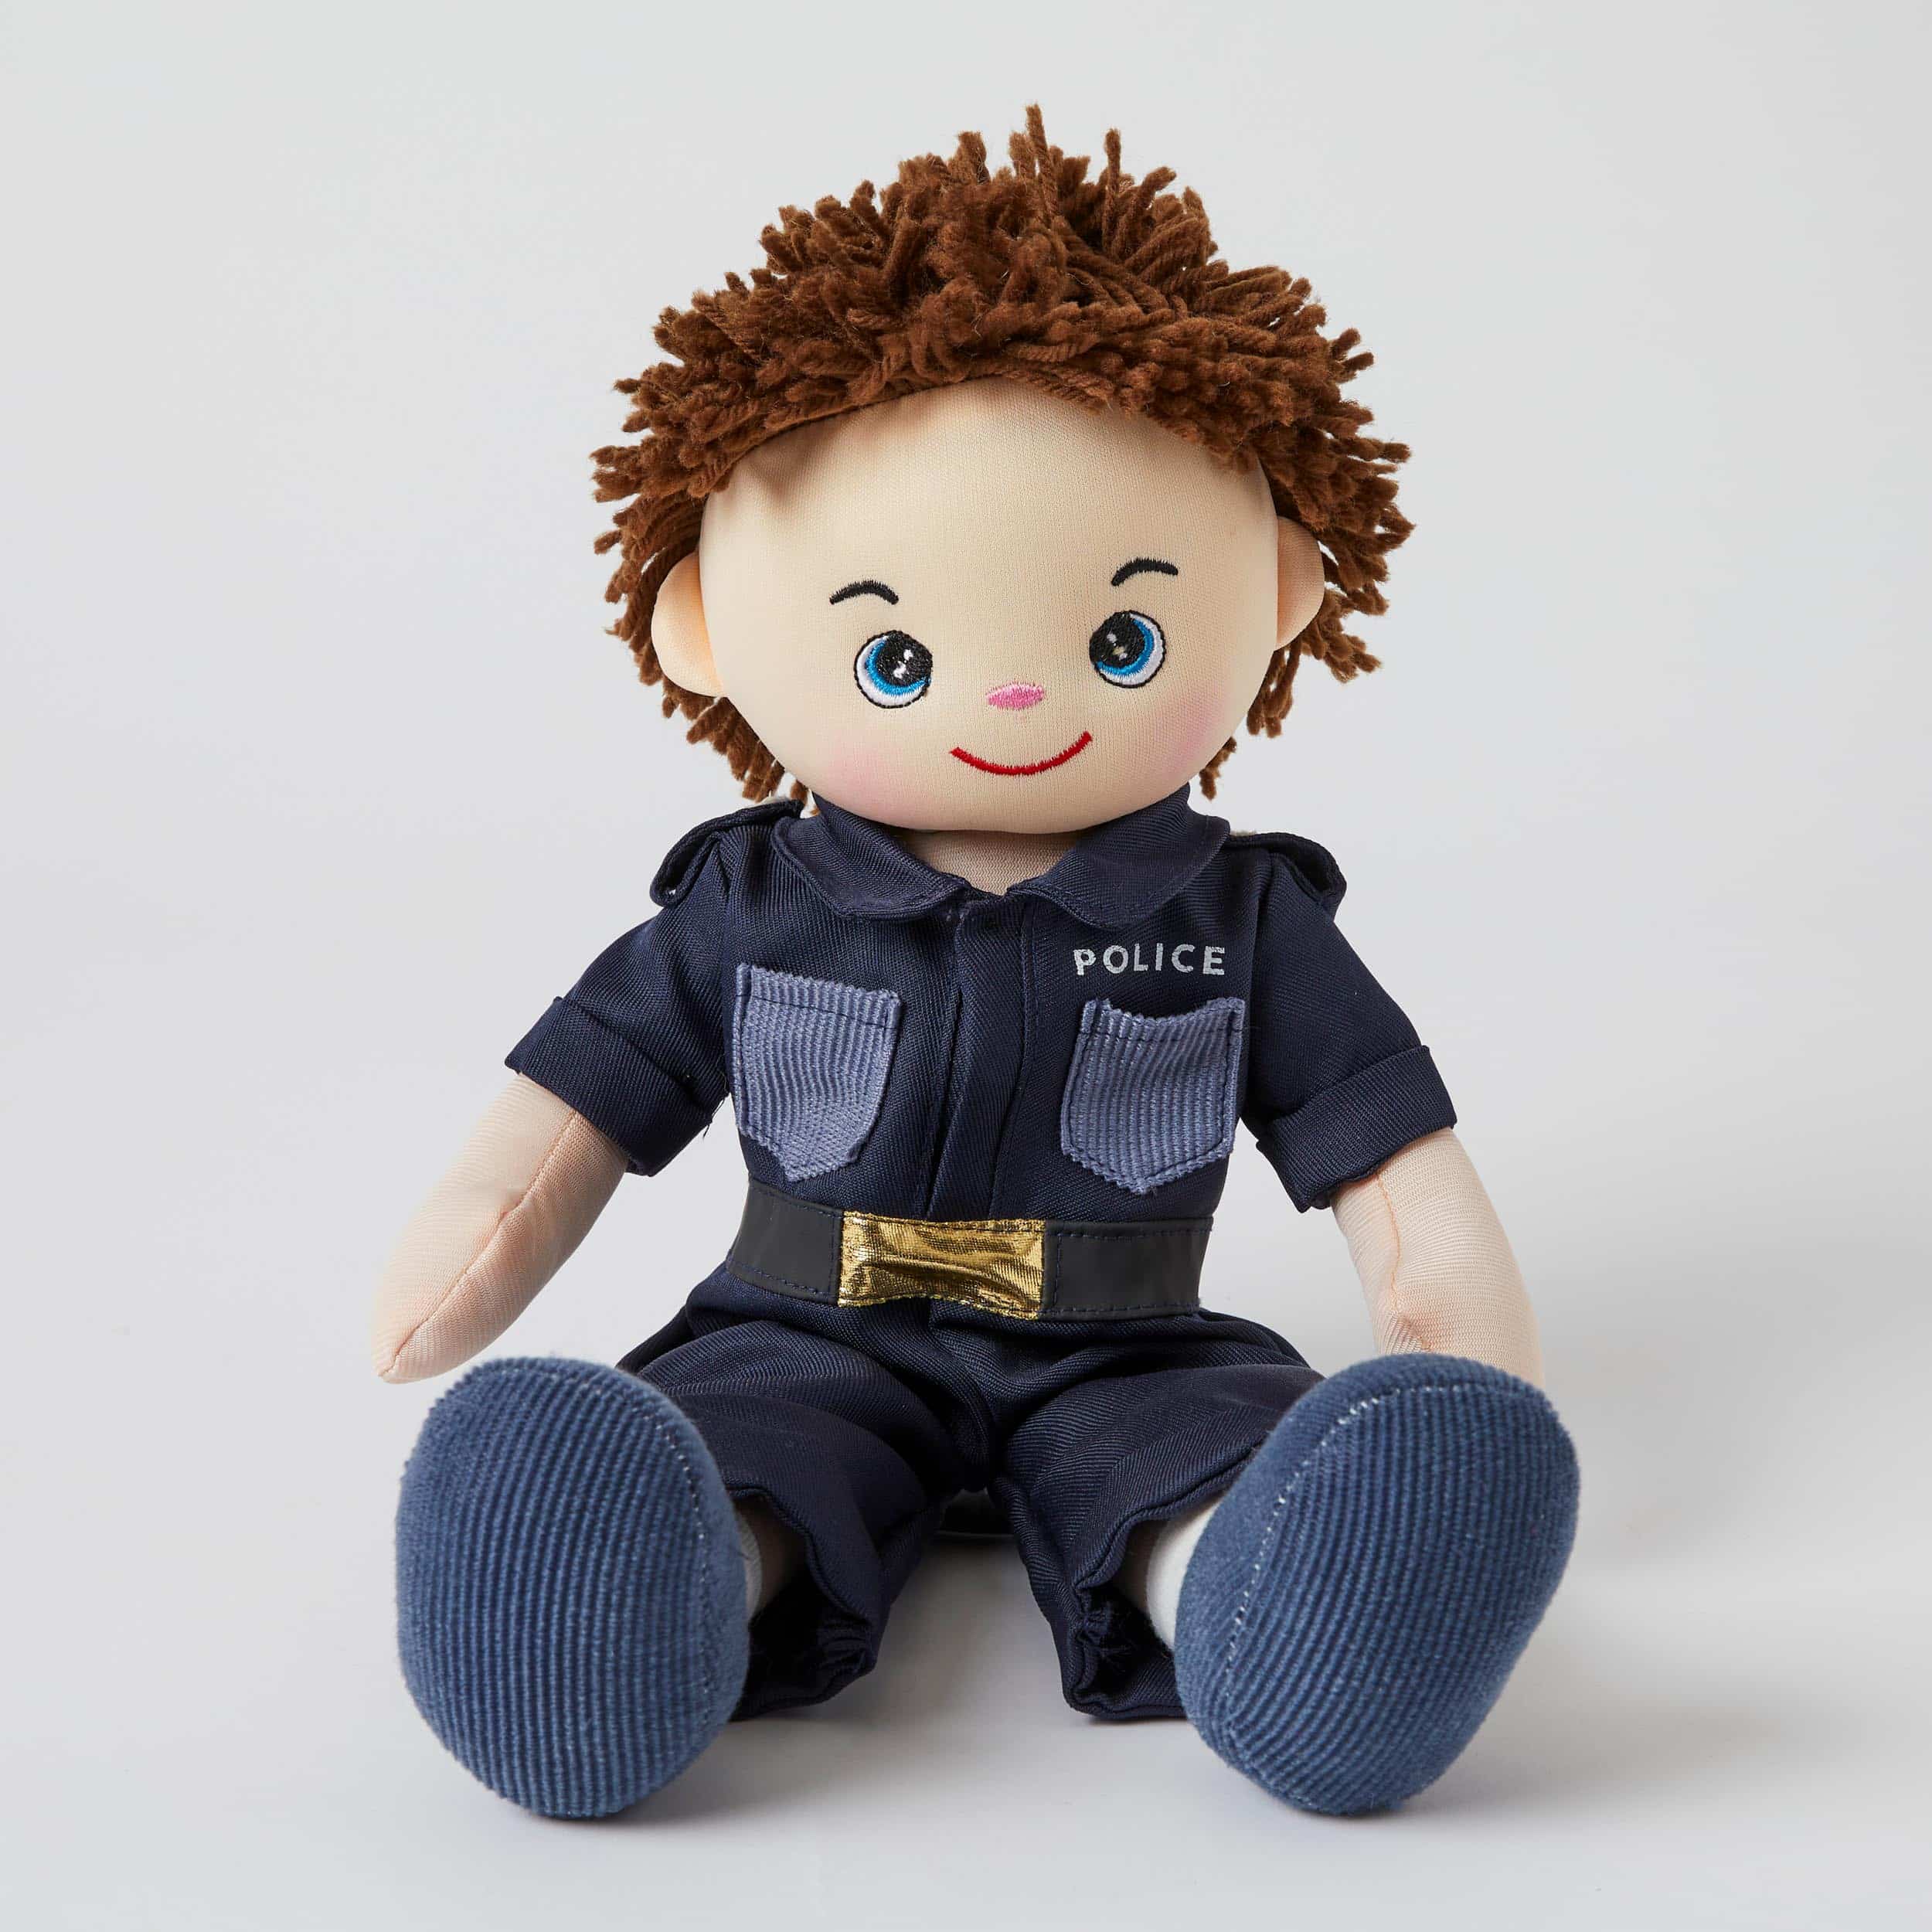 Pilbeam Toys Soft My Best Friend - Lewis the Police Officer